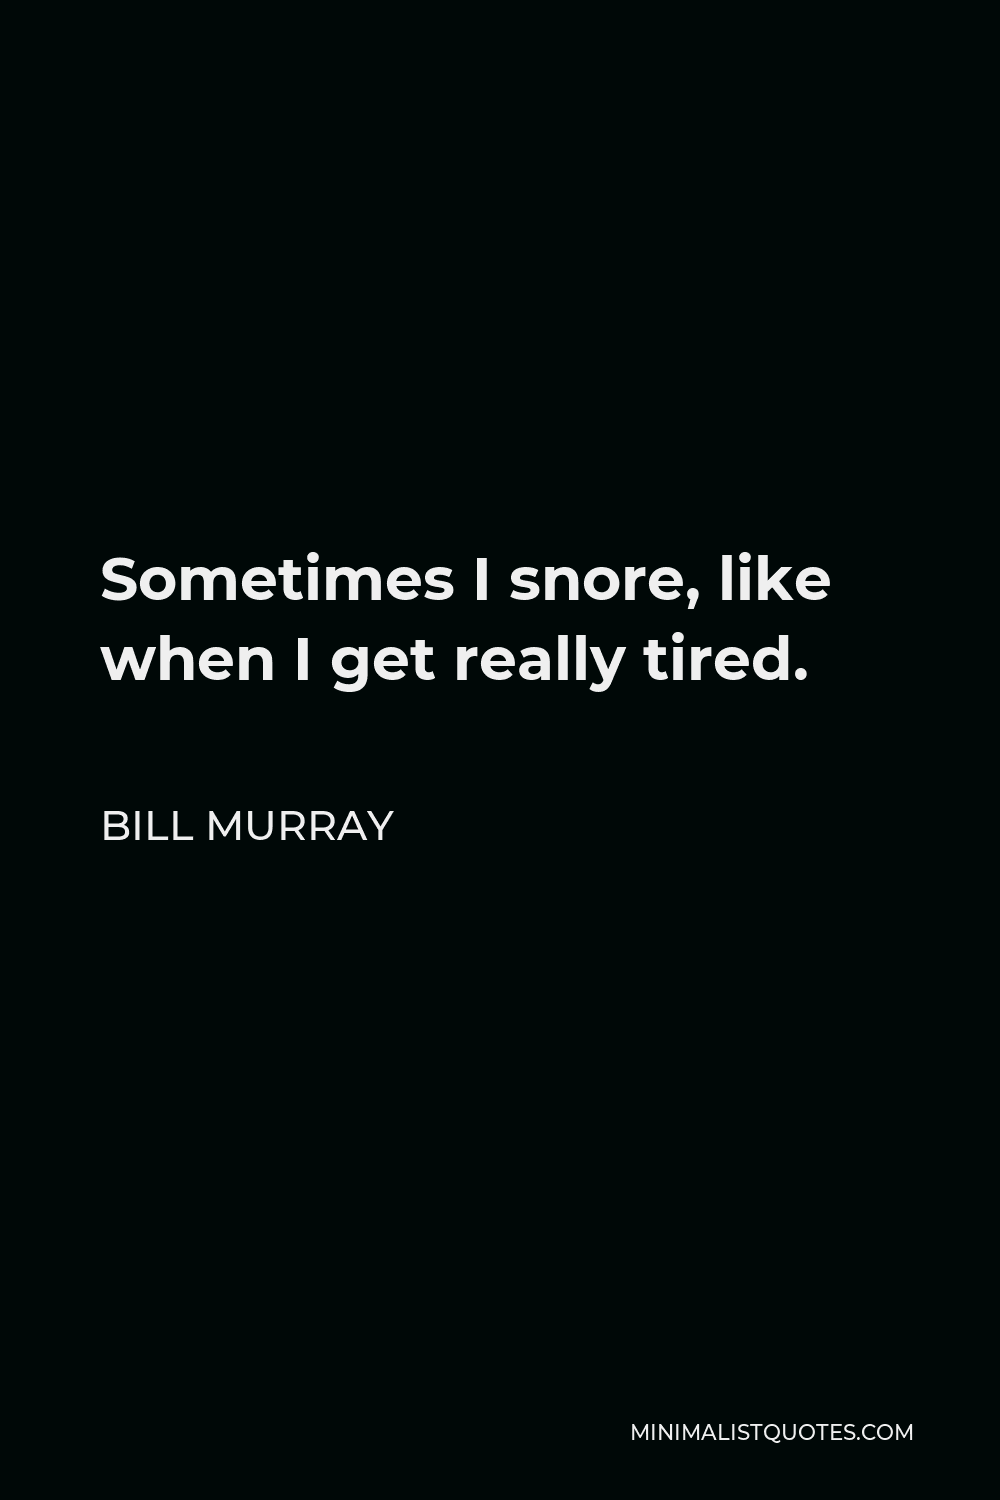 Bill Murray Quote - Sometimes I snore, like when I get really tired.